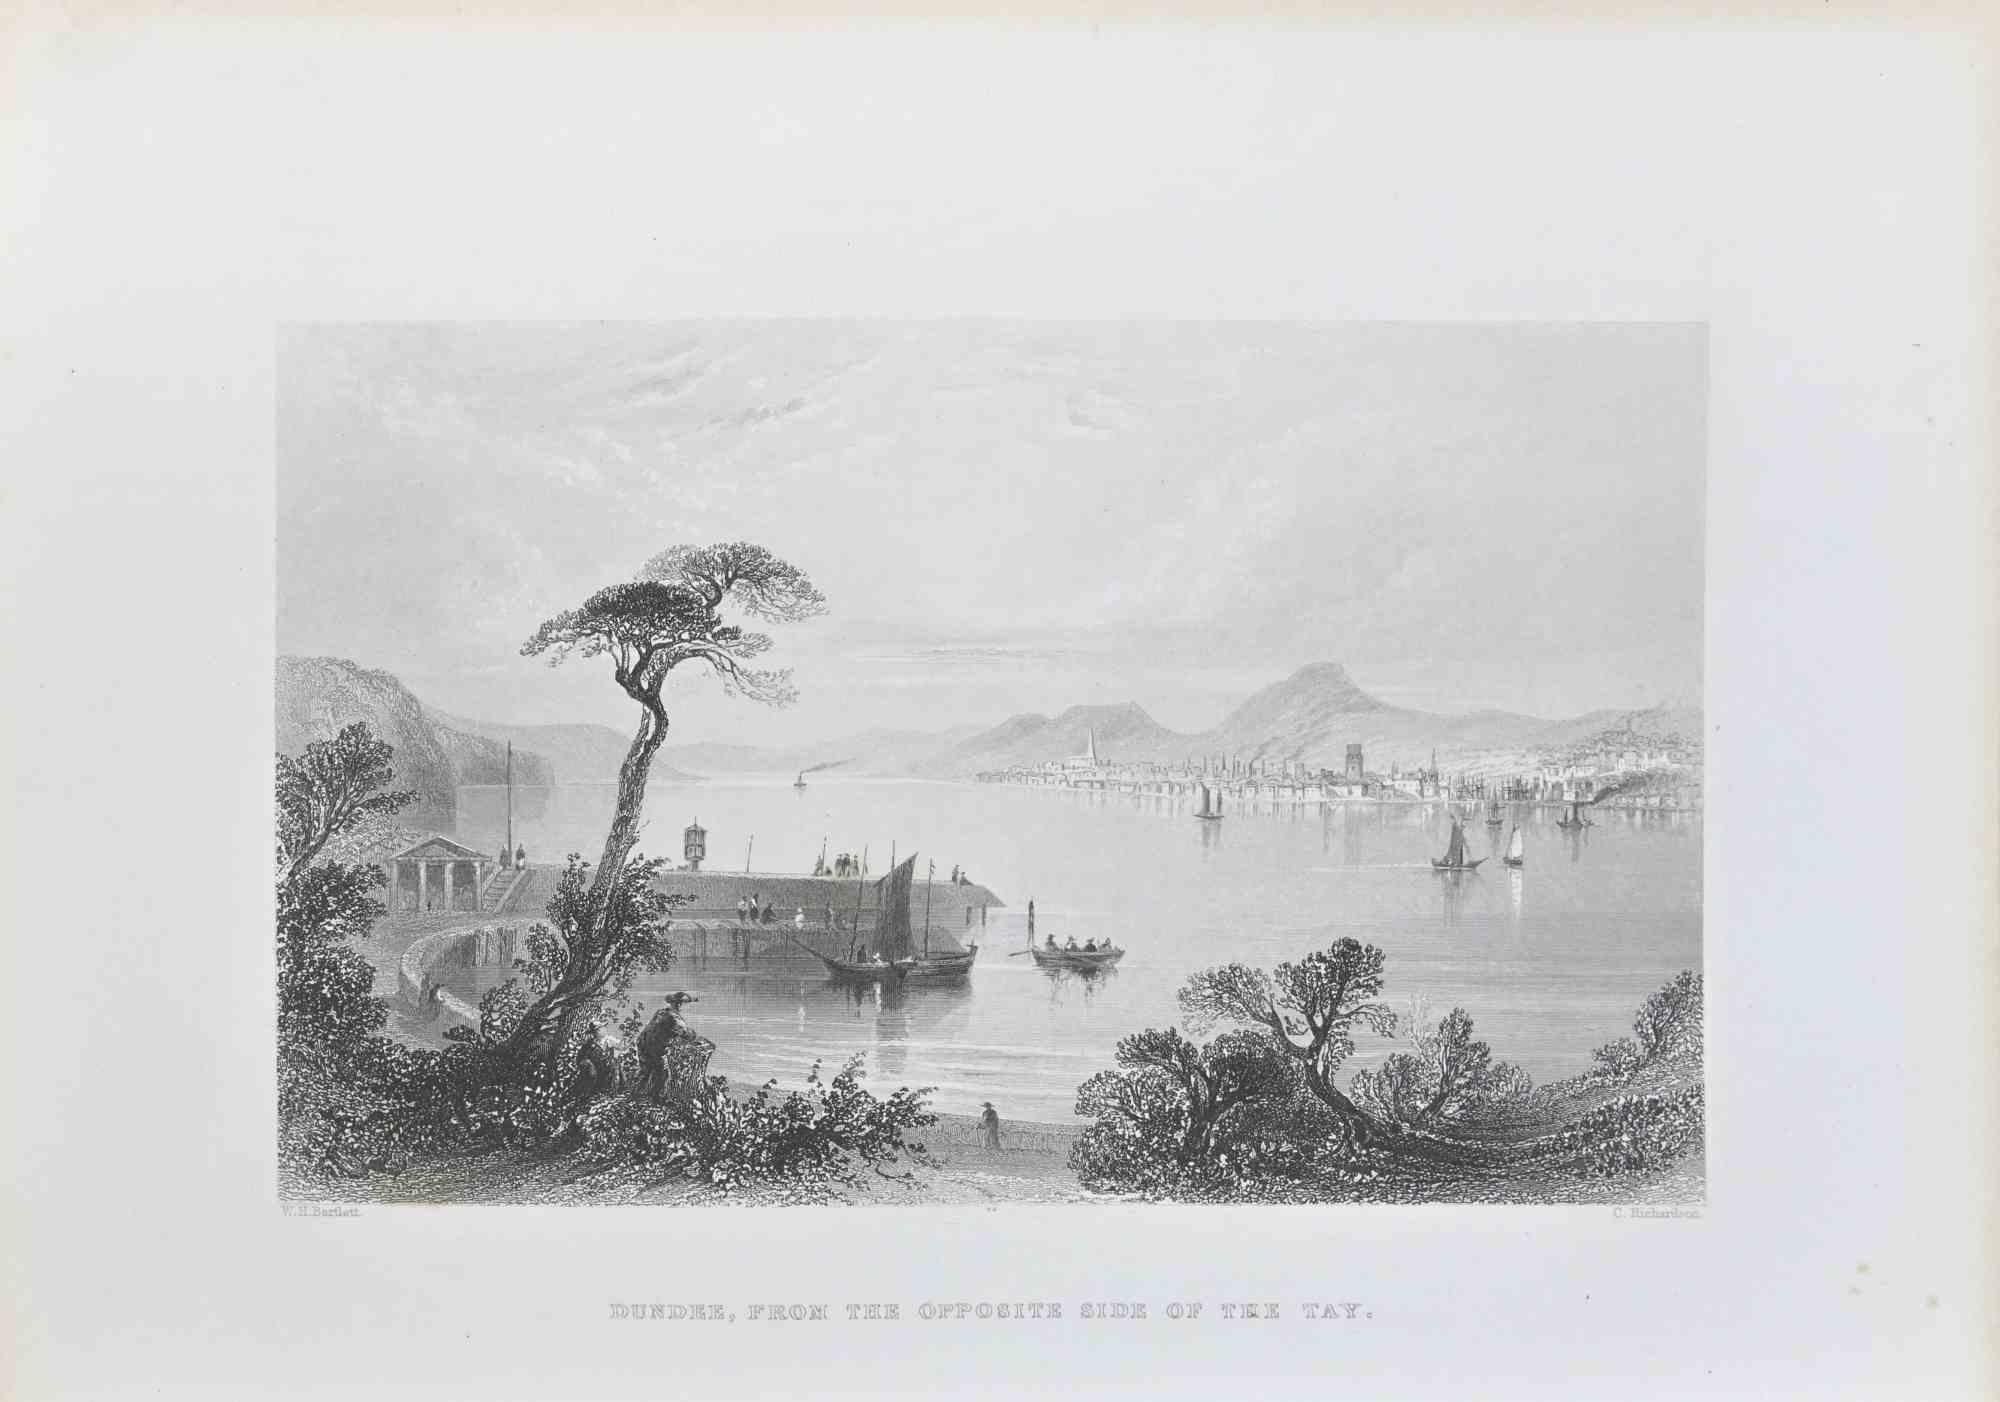 Dundee is an engraving on paper realized by C. Richardson in 1838.

The artwork is in good condition.

The artwork is depicted in a well-balanced composition.
